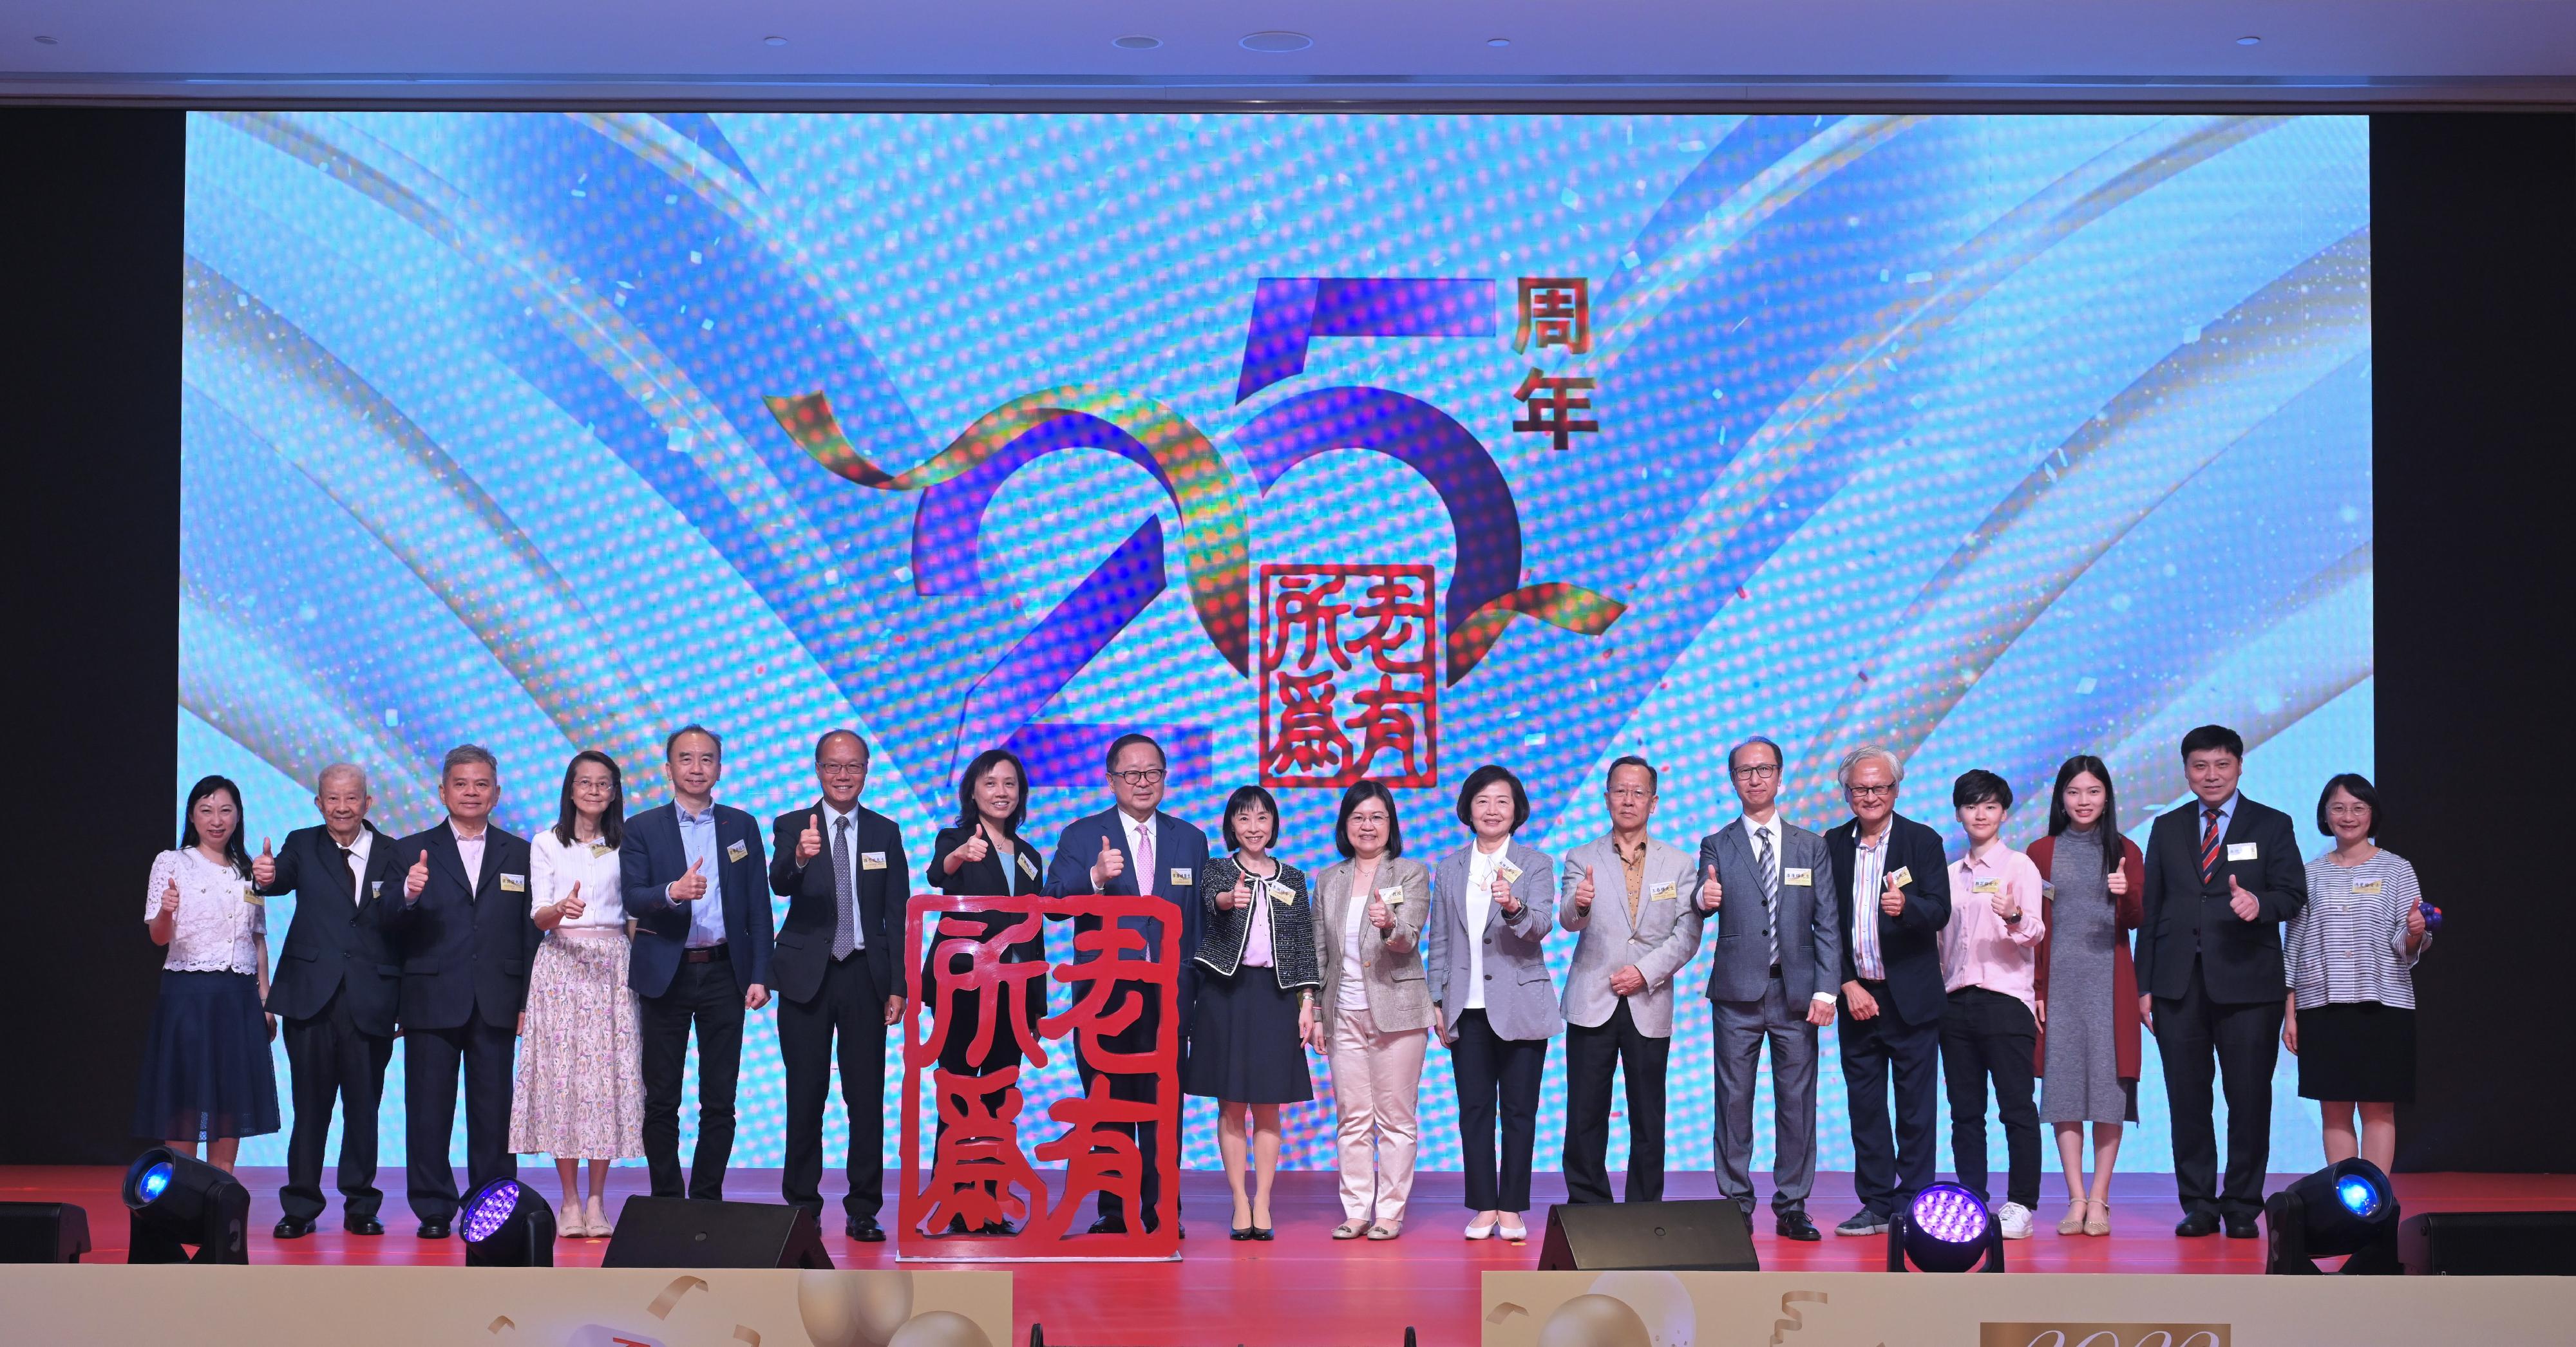 The Social Welfare Department today (November 1) held the 2023 Award Presentation Ceremony of the Opportunities for the Elderly Project (OEP). Photo shows the Director of Social Welfare, Miss Charmaine Lee (ninth left); the Chairman of the Elderly Commission, Dr Donald Li (eighth left); and the Chairman of the OEP Advisory Committee, Professor Diana Lee (ninth right), joined by other guests in celebrating the 25th anniversary of the implementation of the OEP at the ceremony.